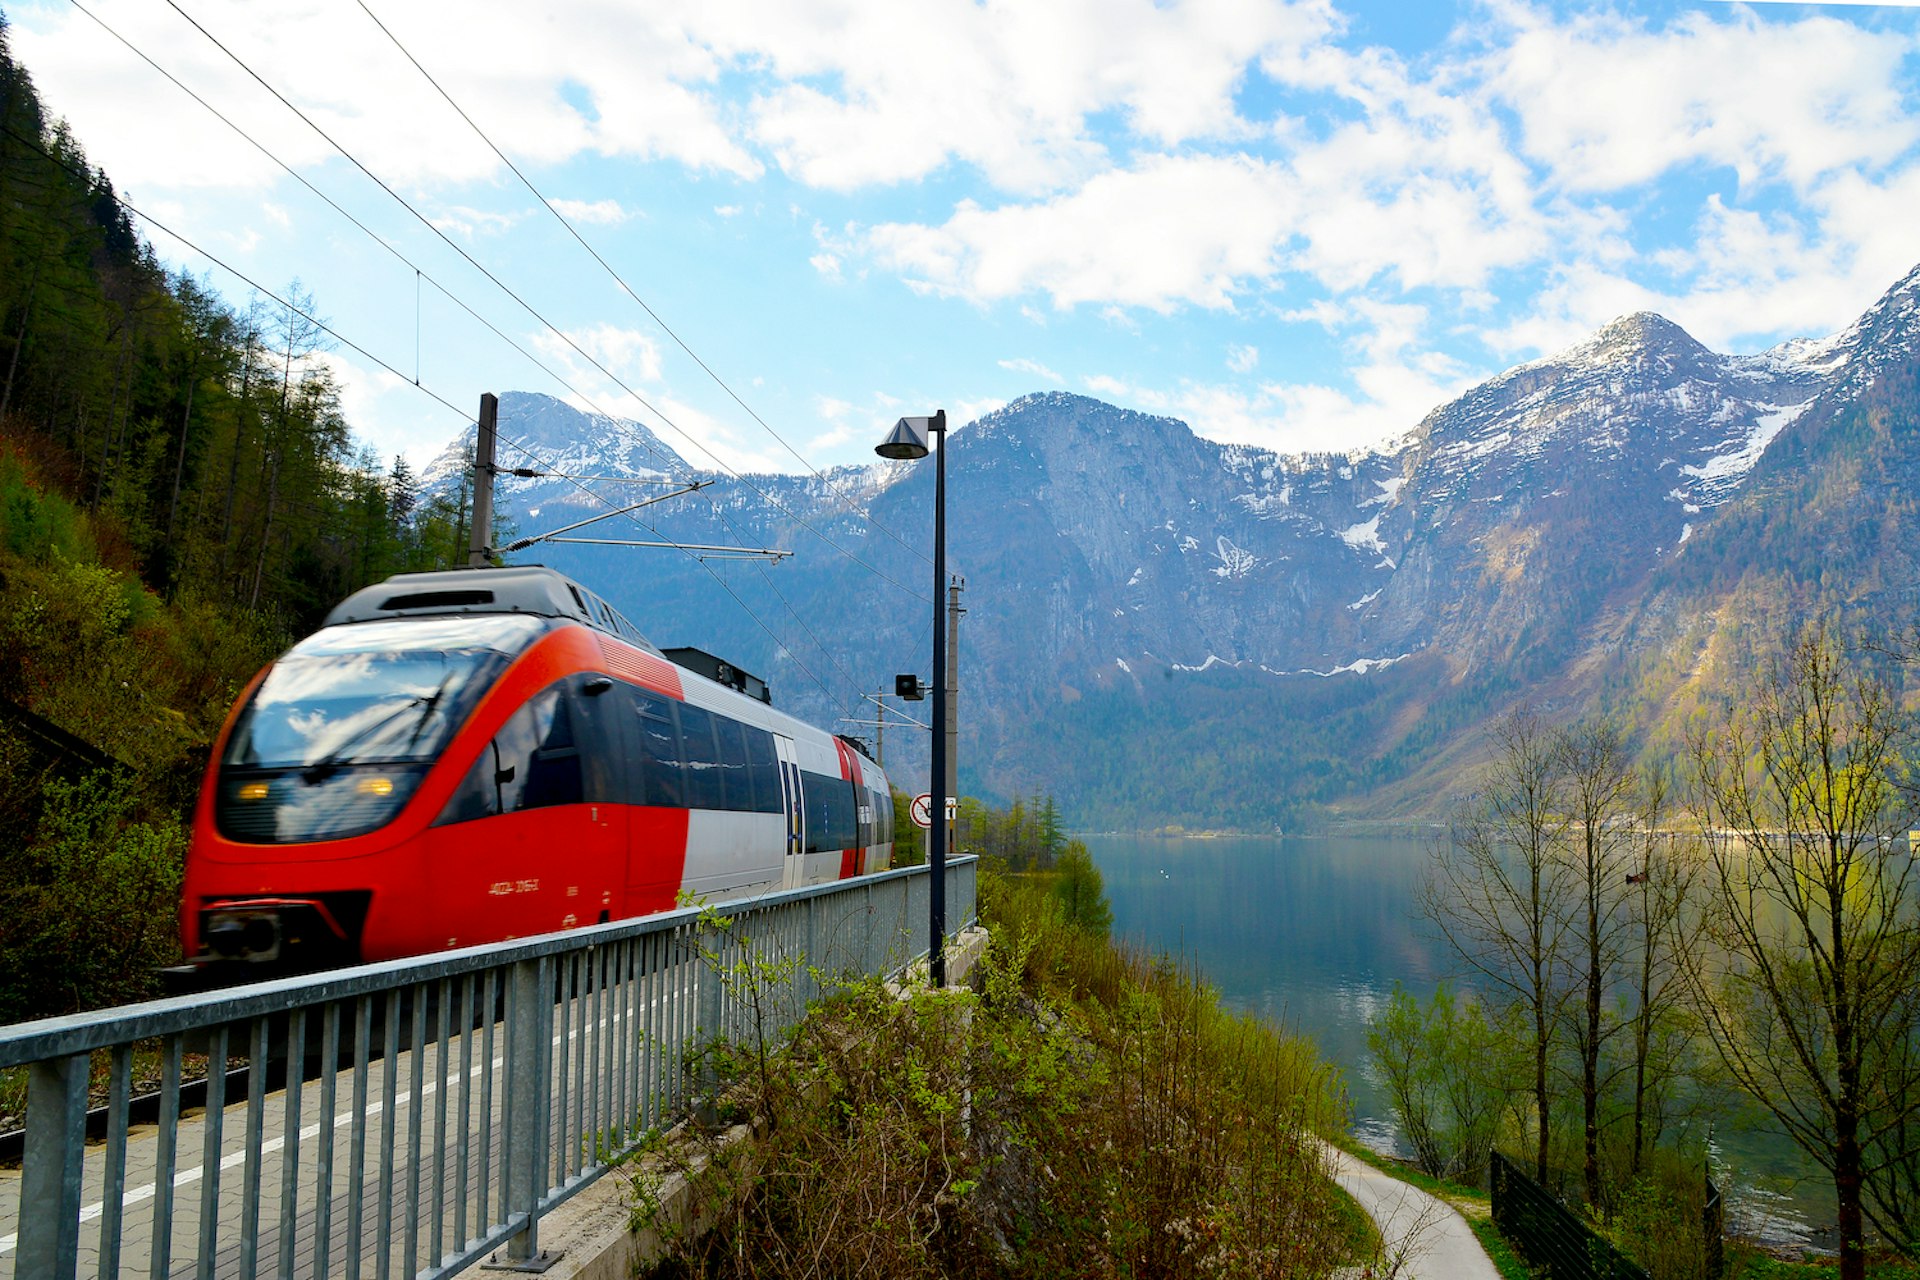 A high-speed train passing the Hallstatt station with mountains in the distance, Austria